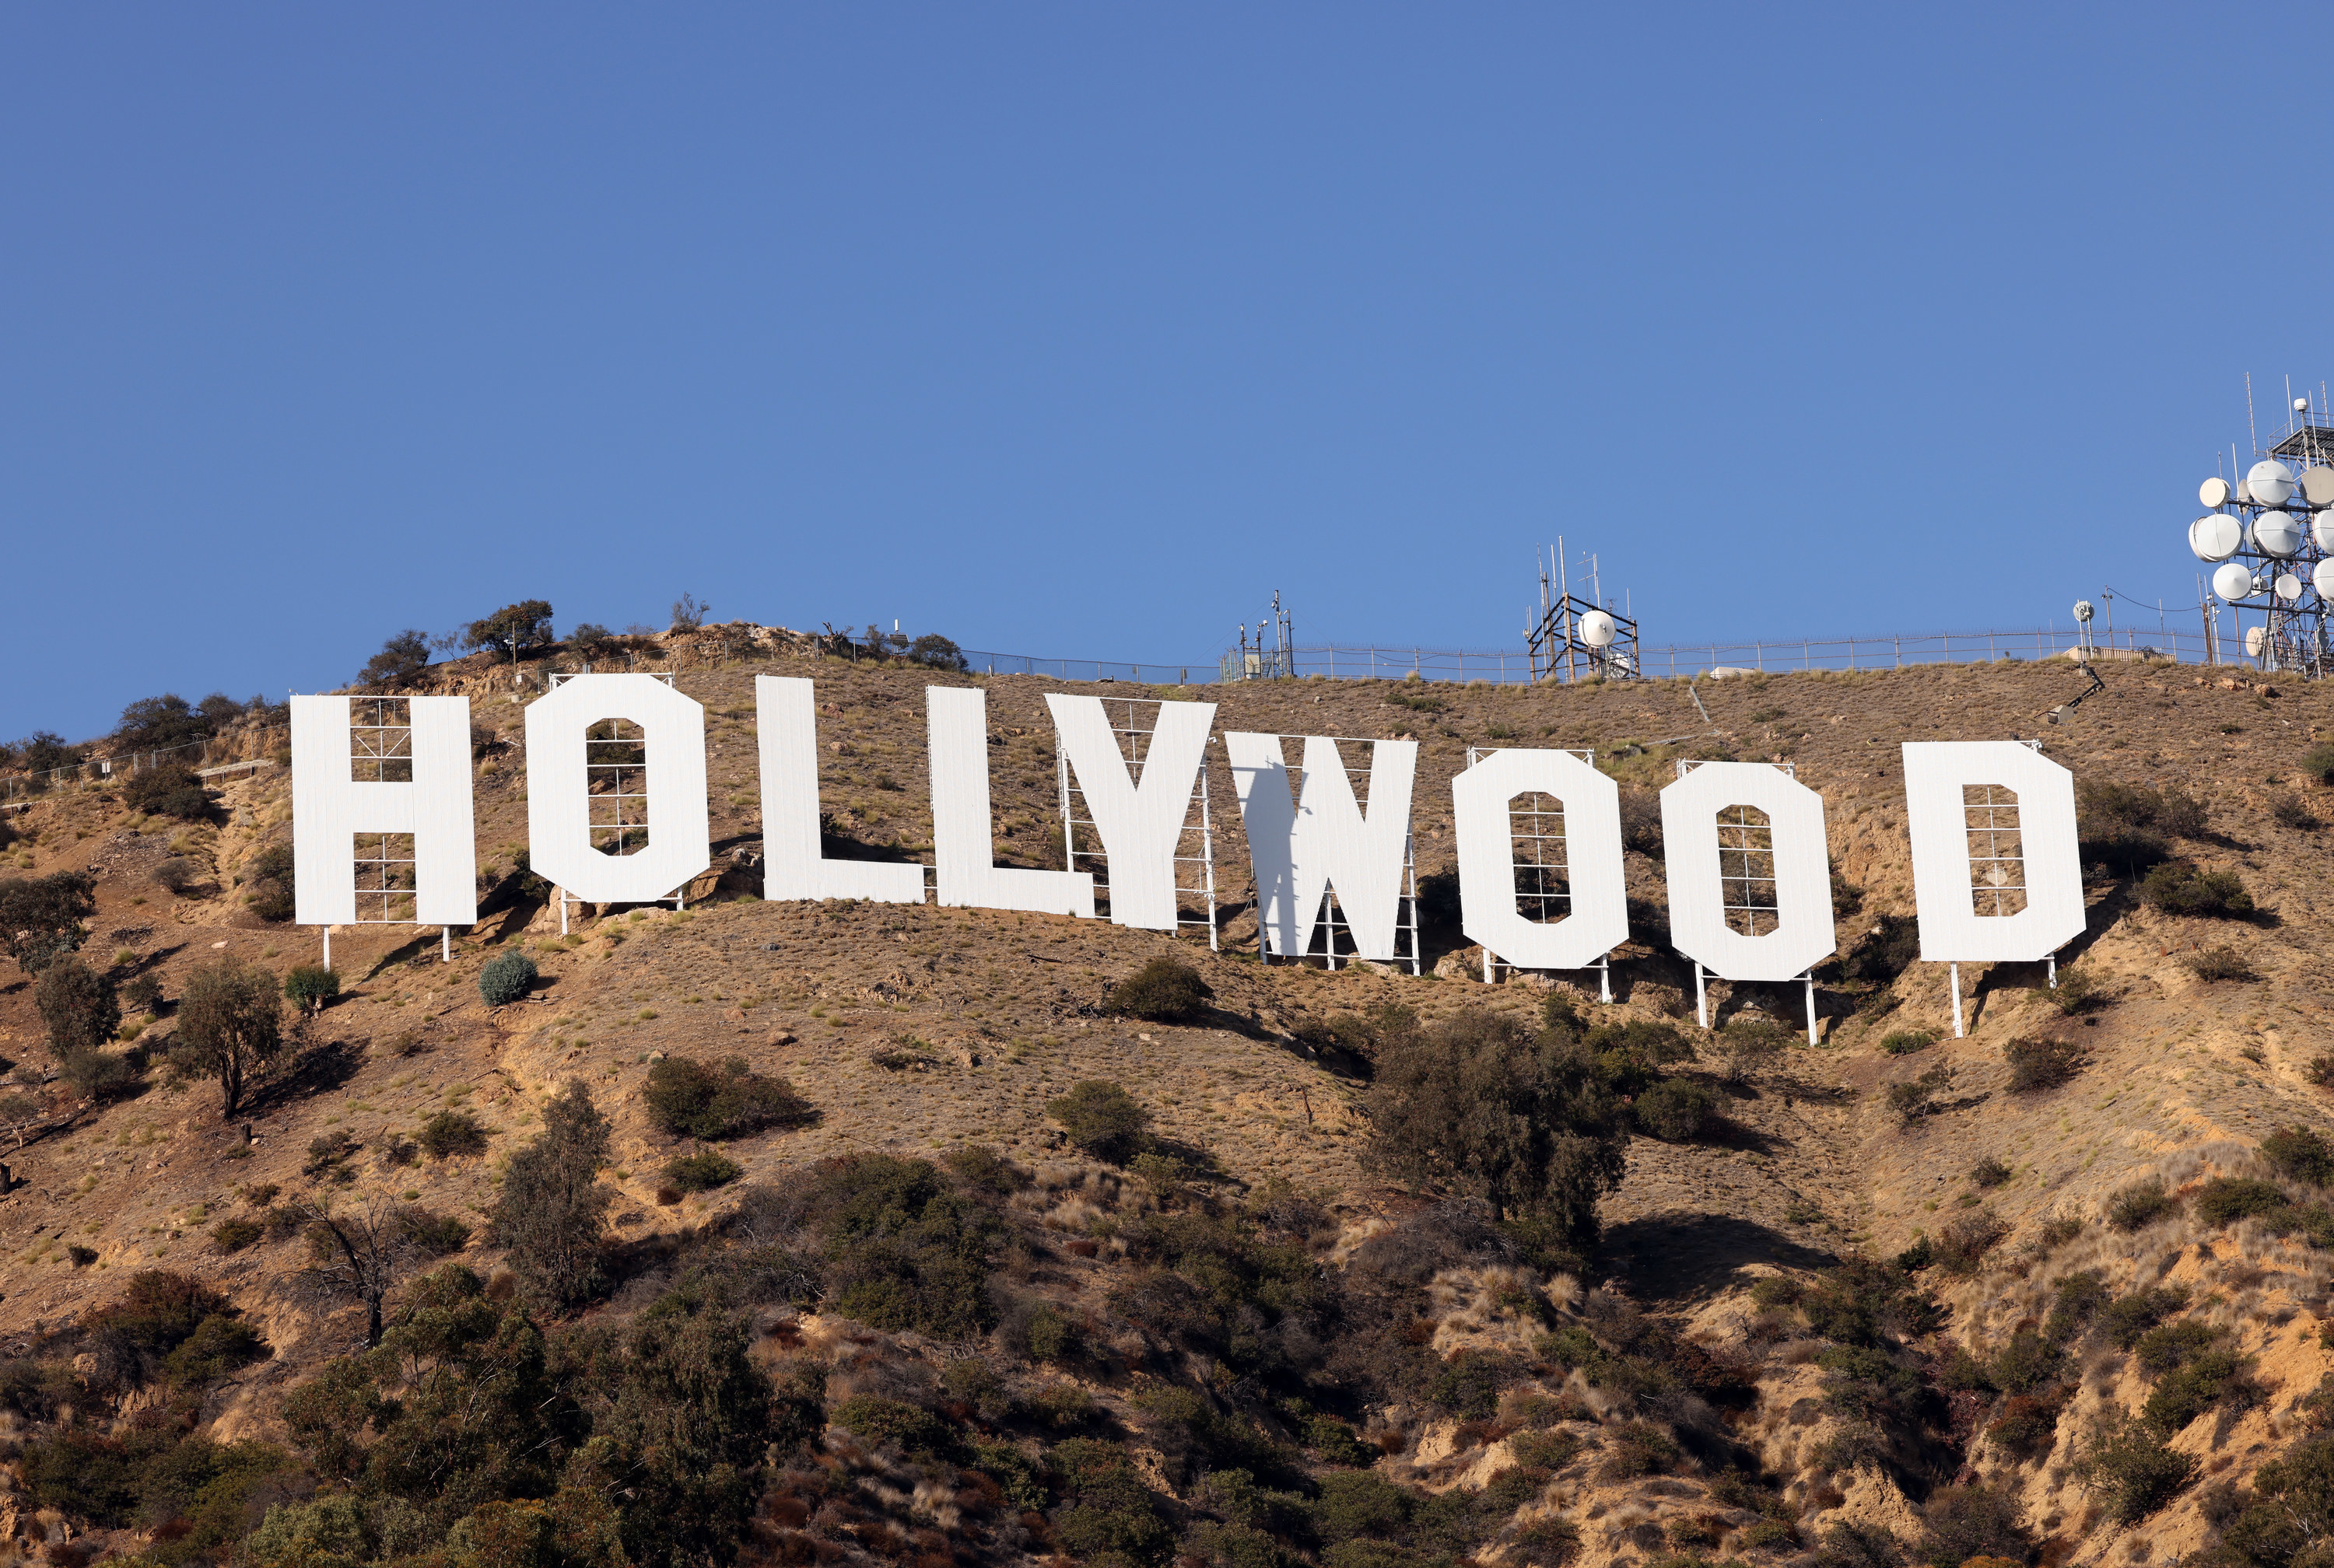 The &quot;Hollywood&quot; sign in California